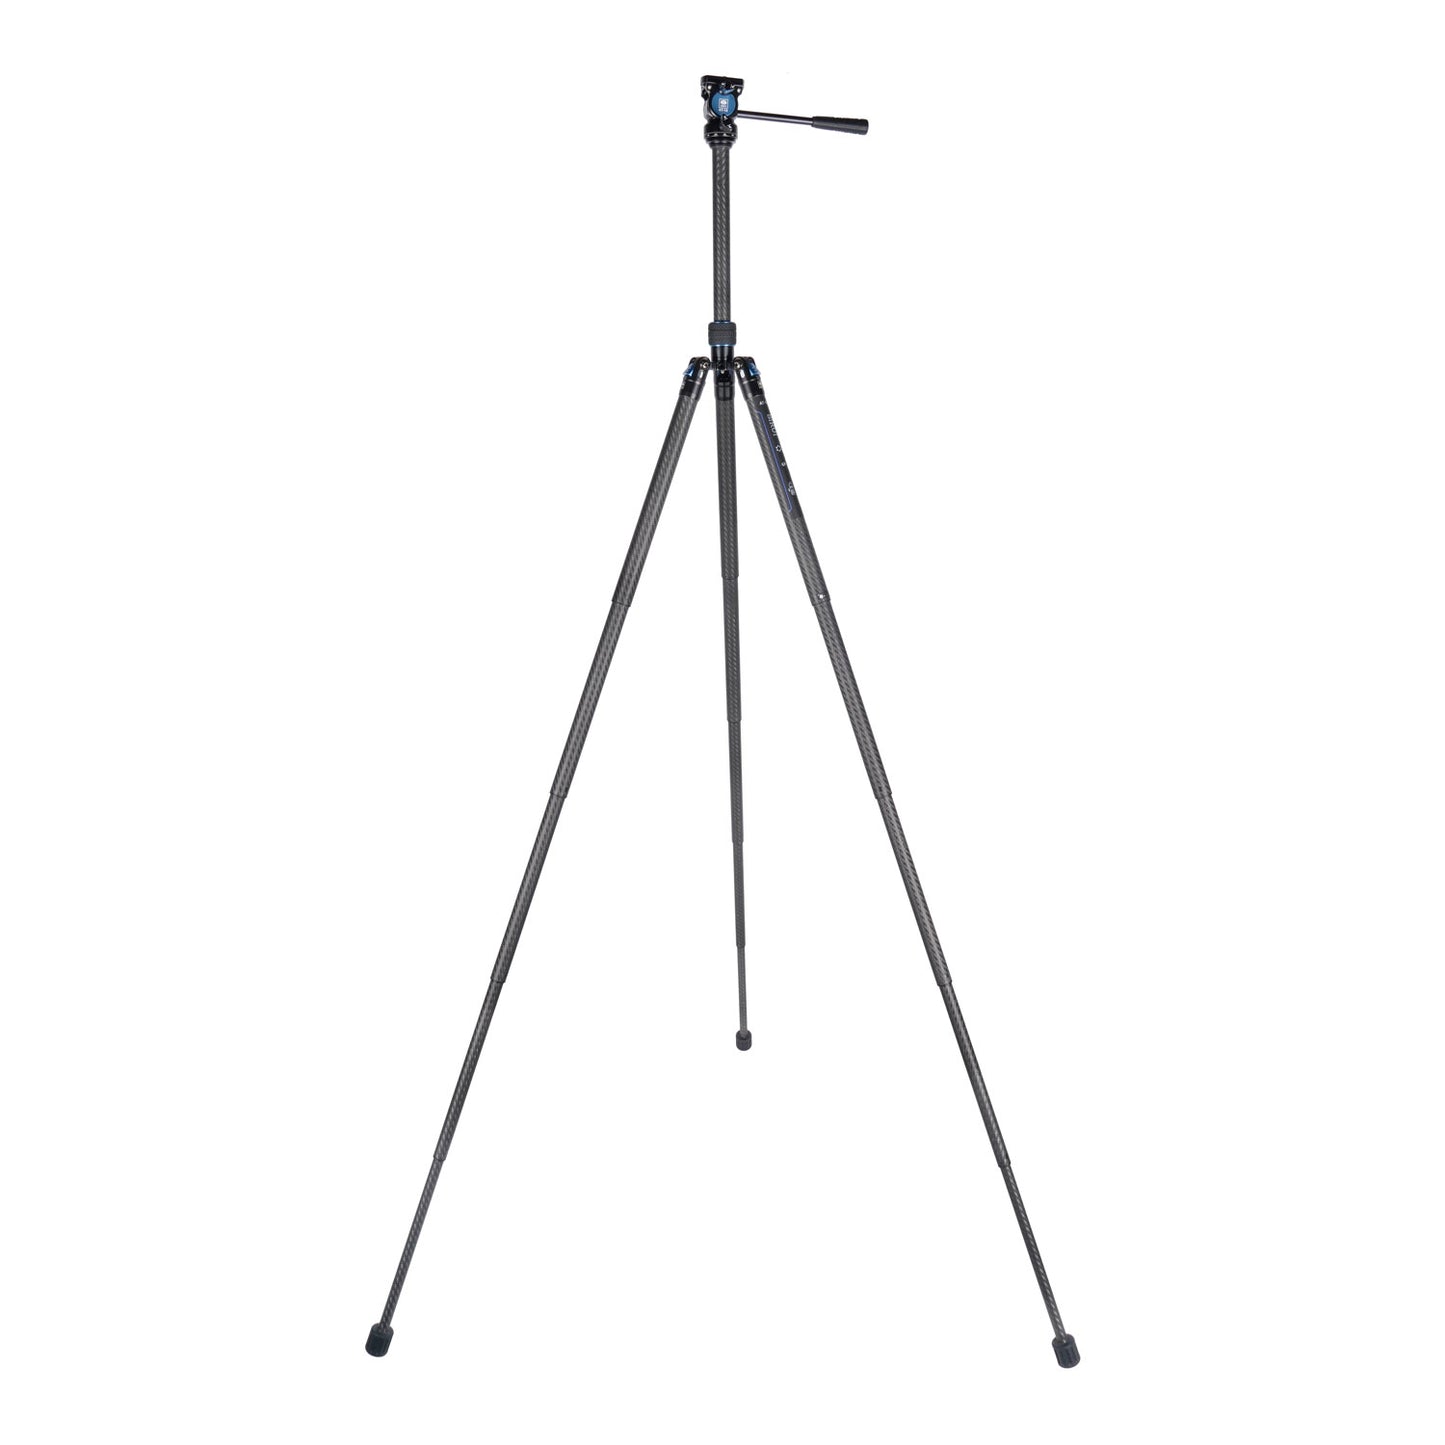 SIRUI Traveler X Compact - Travel tripod carbon with video head - ultra light &amp; super compact